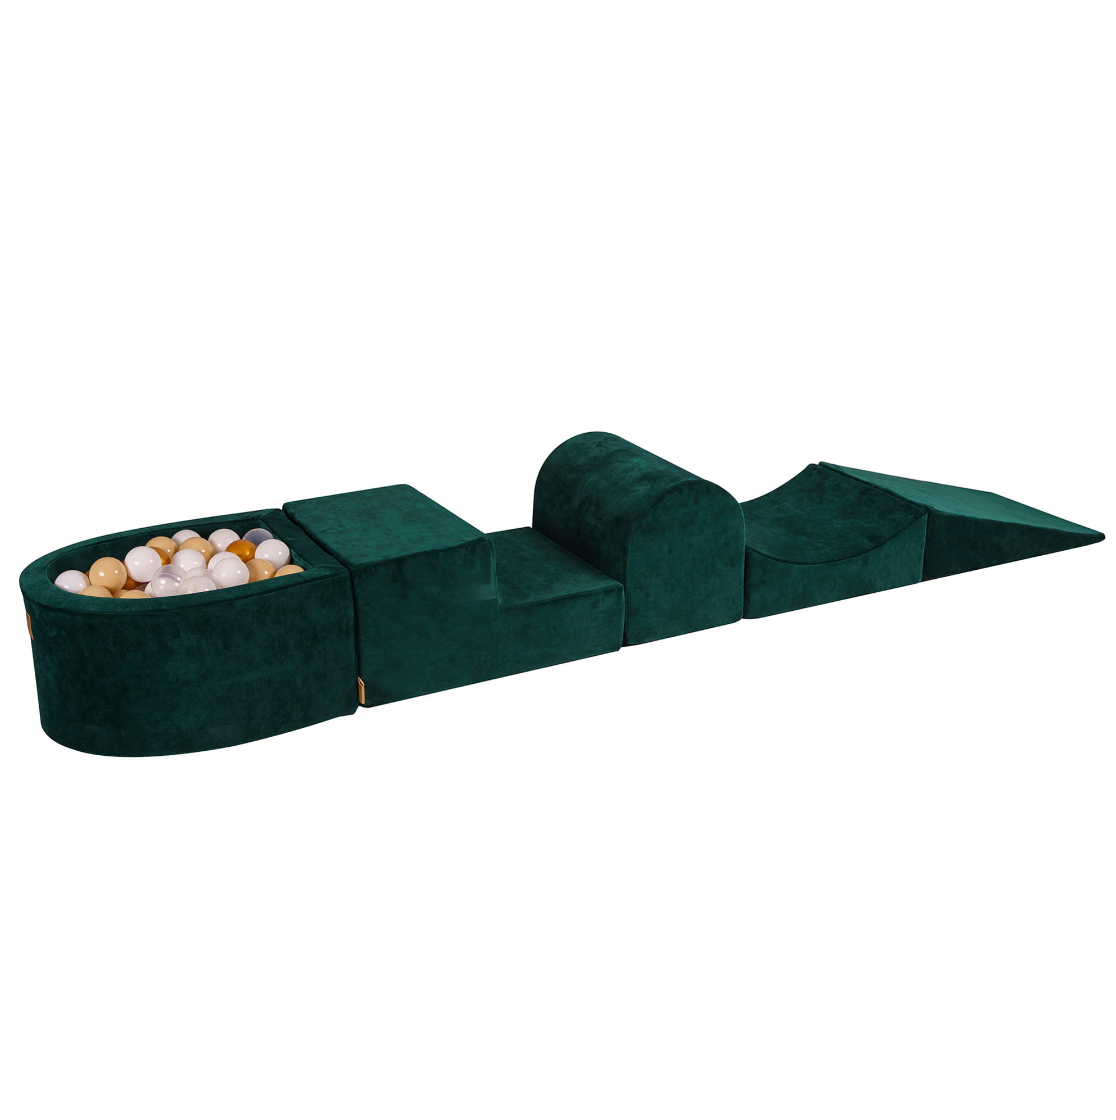 Playsystem with Ball Pit, Velvet Emerald Green